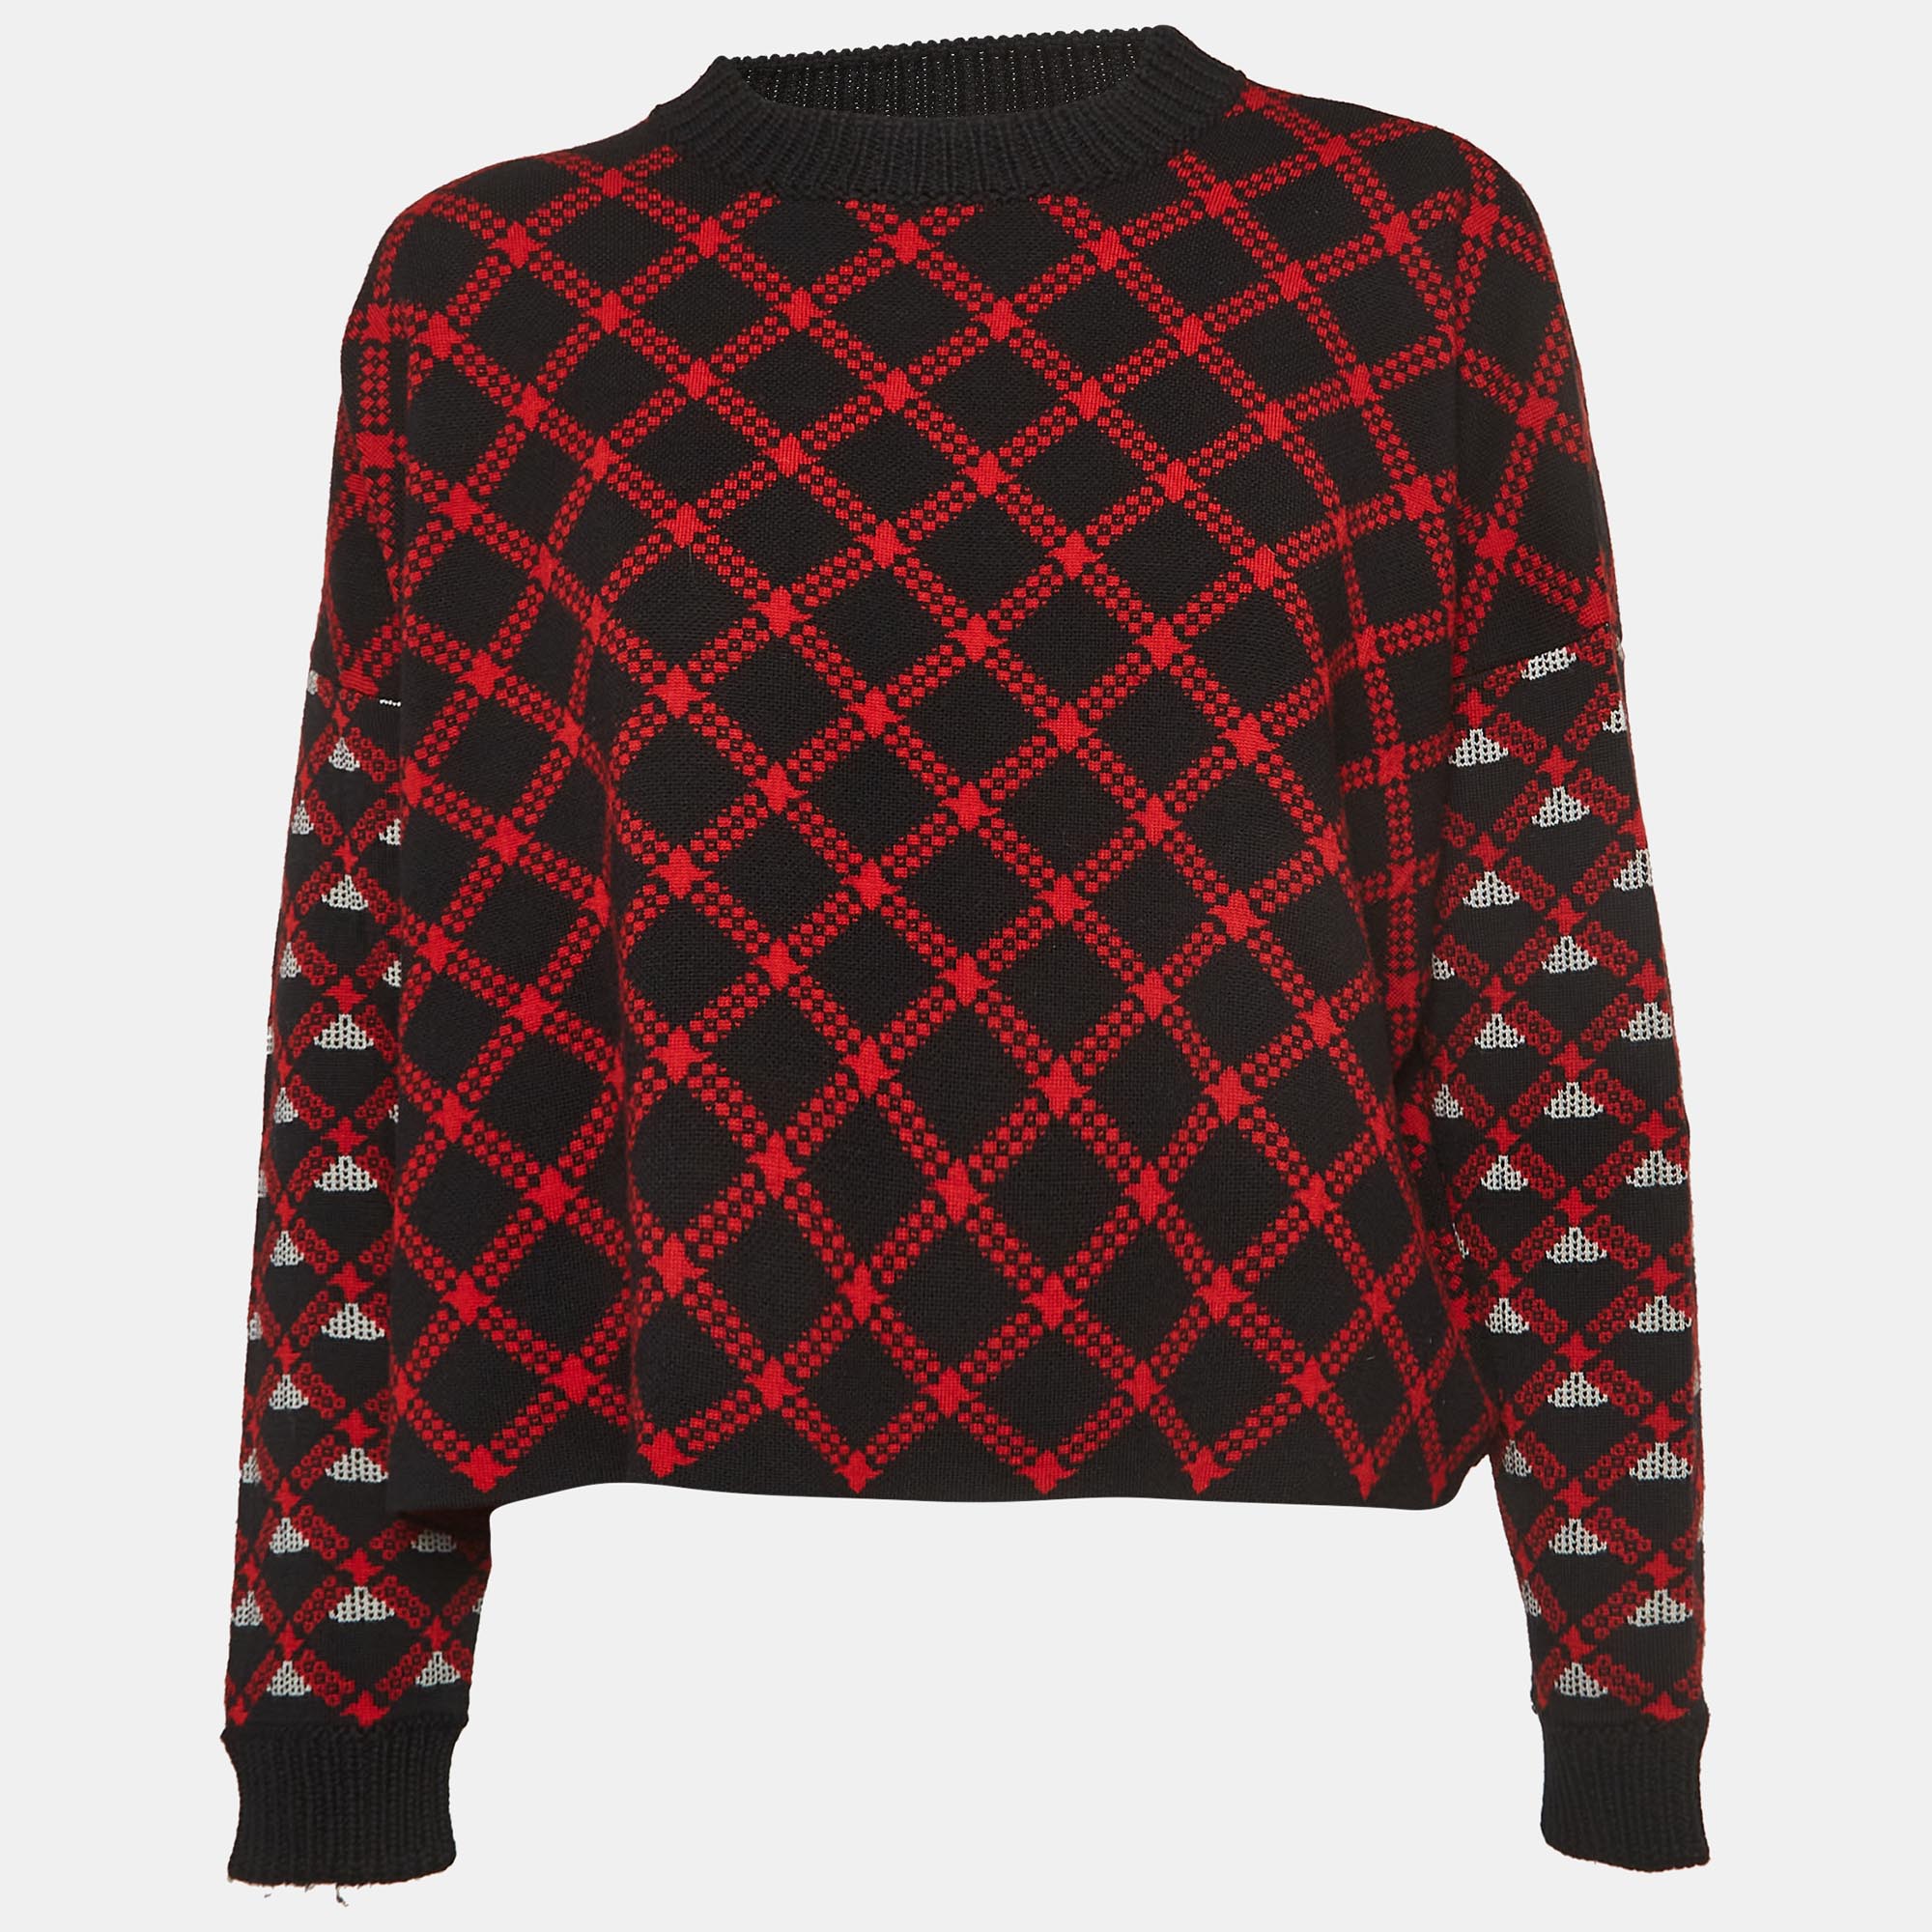 

Marni Black/Red Patterned Wool Sweater